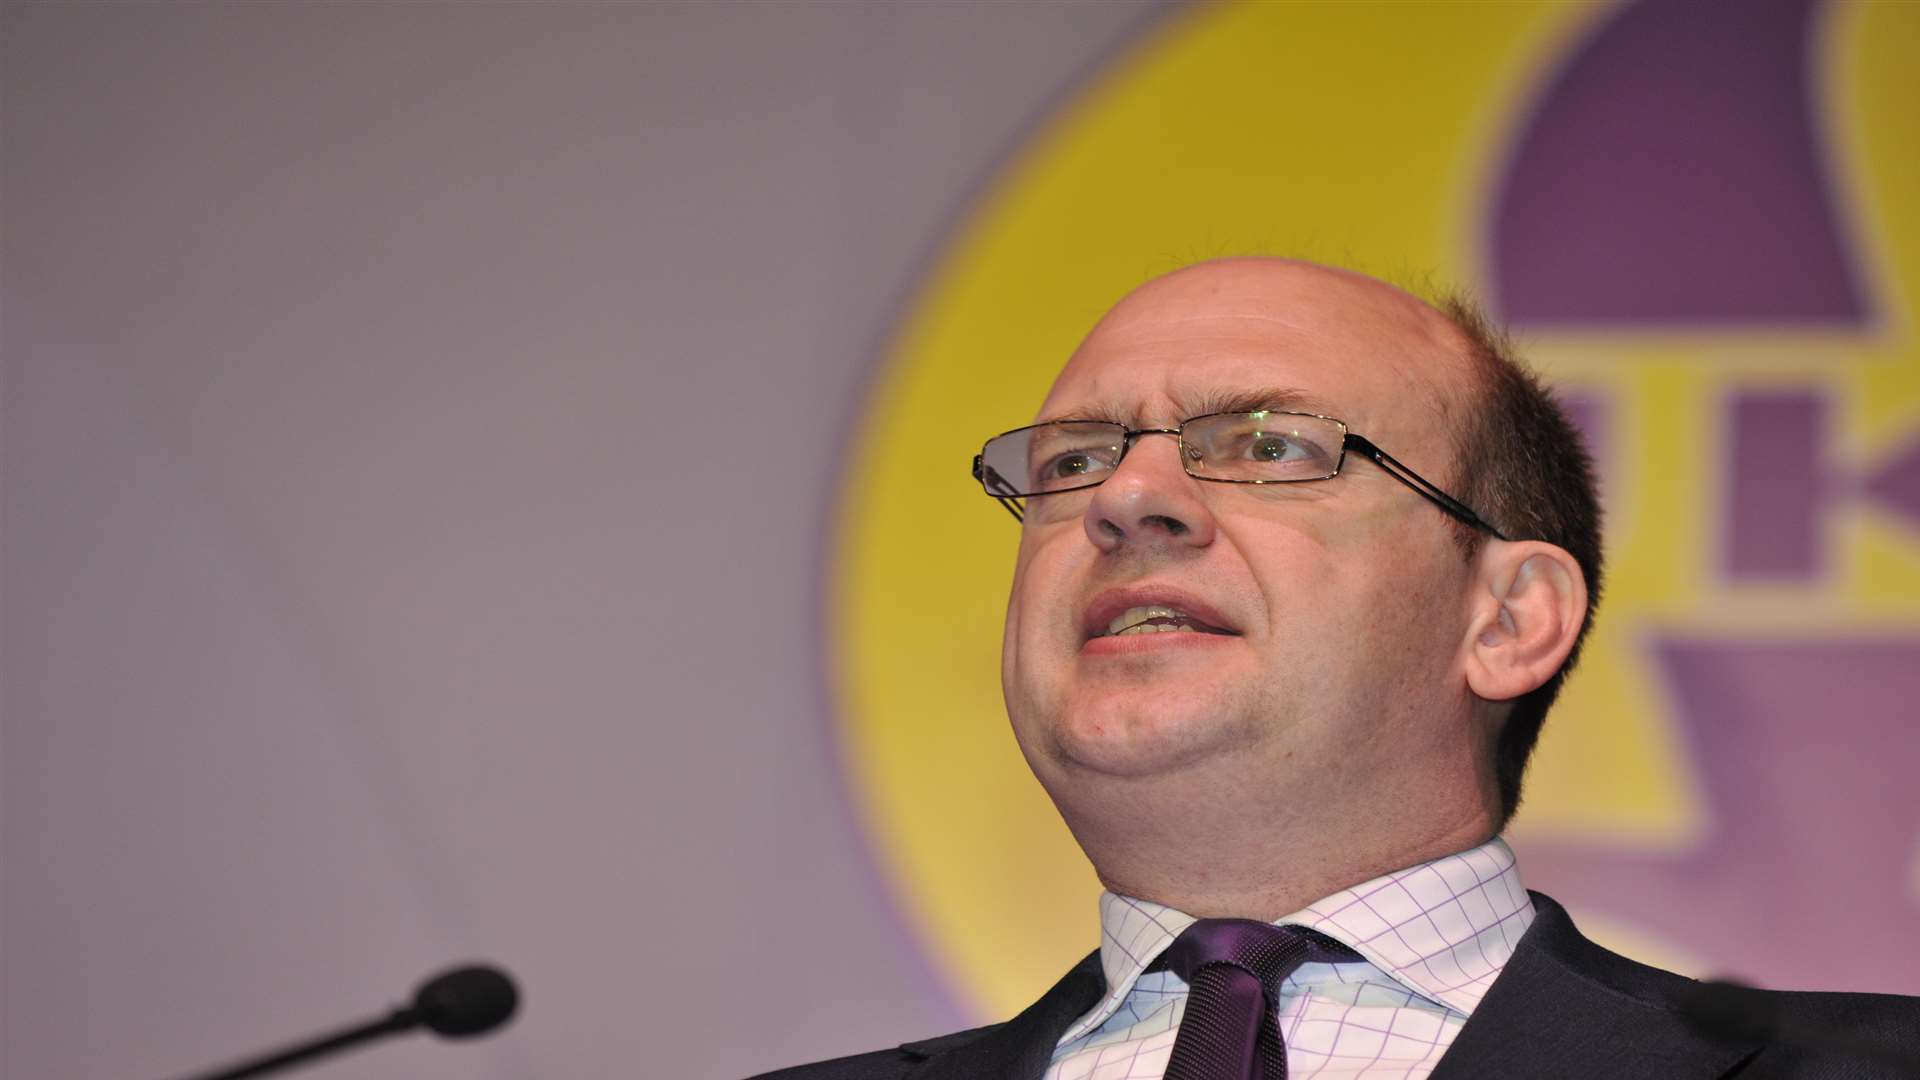 Mark Reckless won the by-election for Ukip